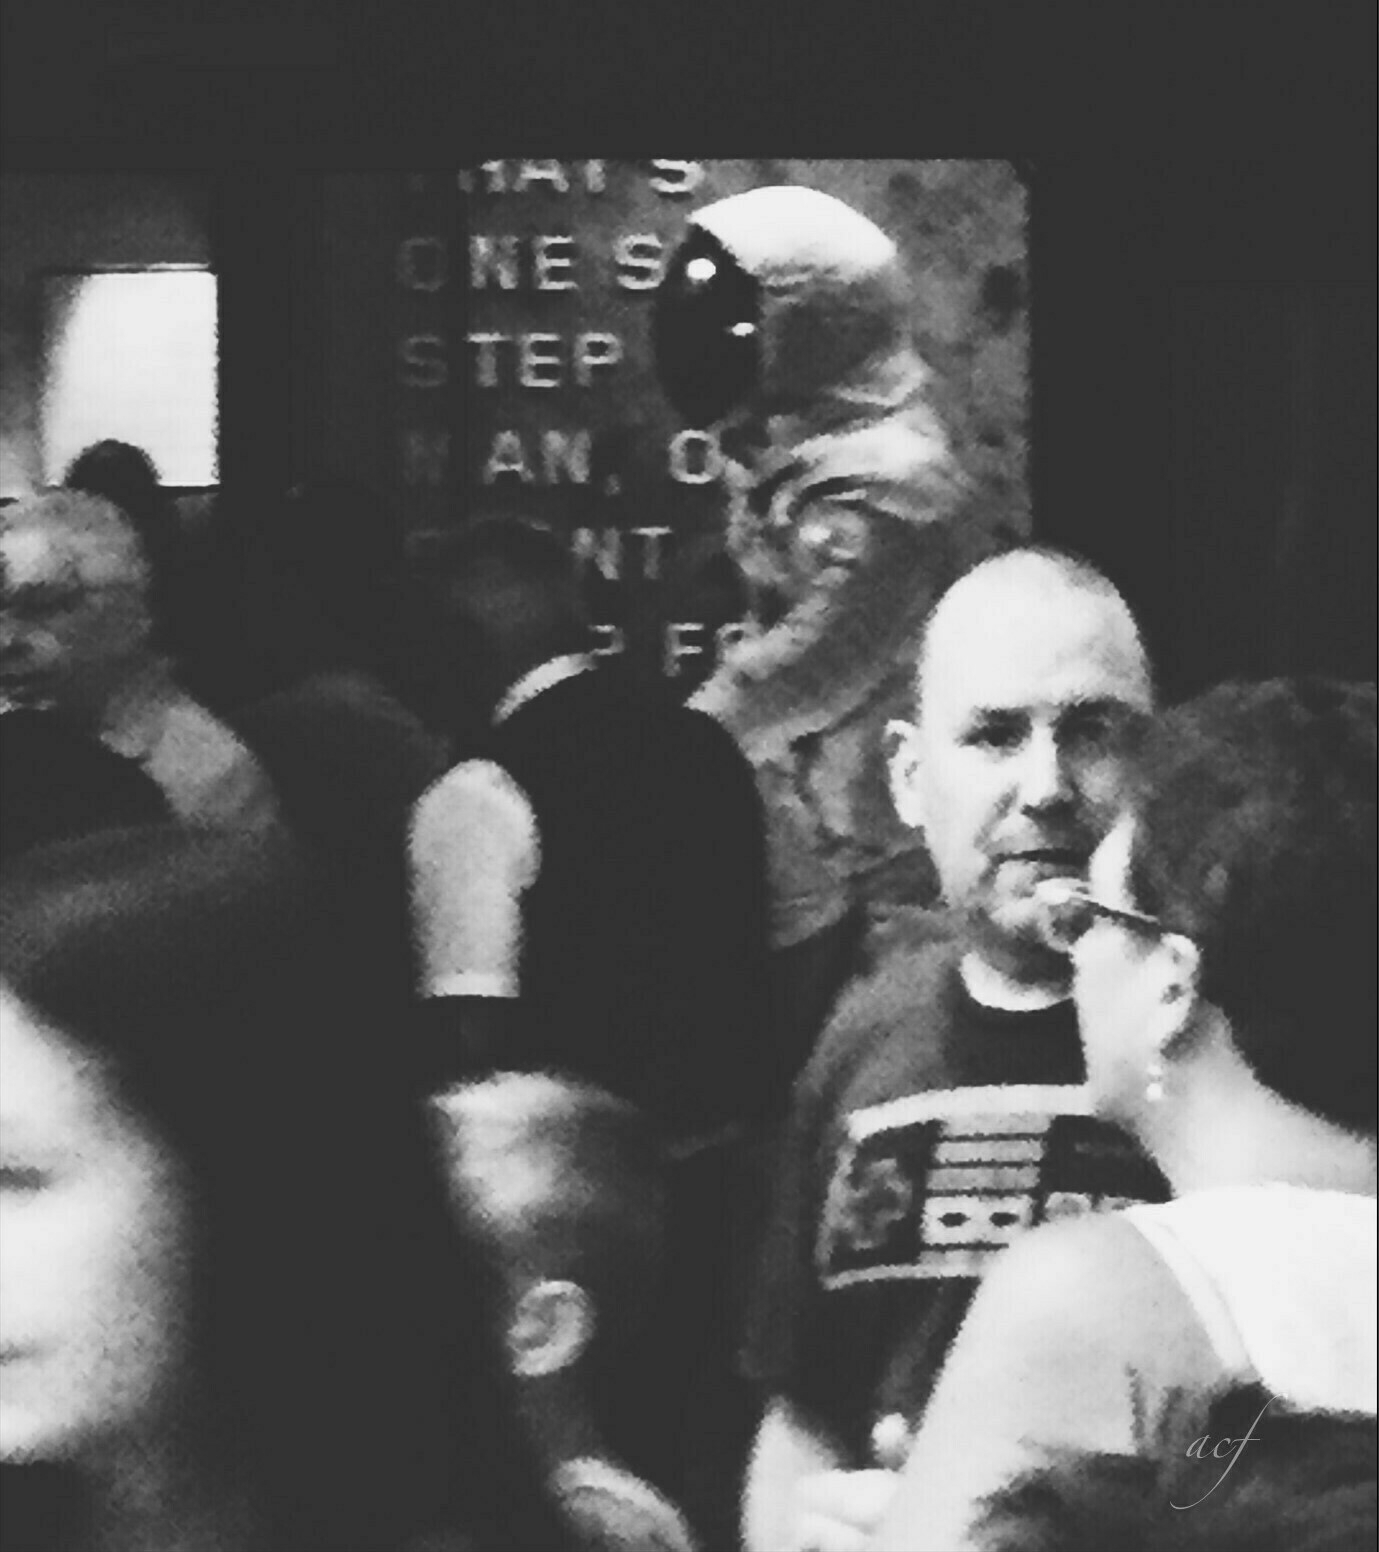 Black and white. A blurred crowd of people in foreground. Top of Armstrong spacesuit in background on display, facing left. The words 